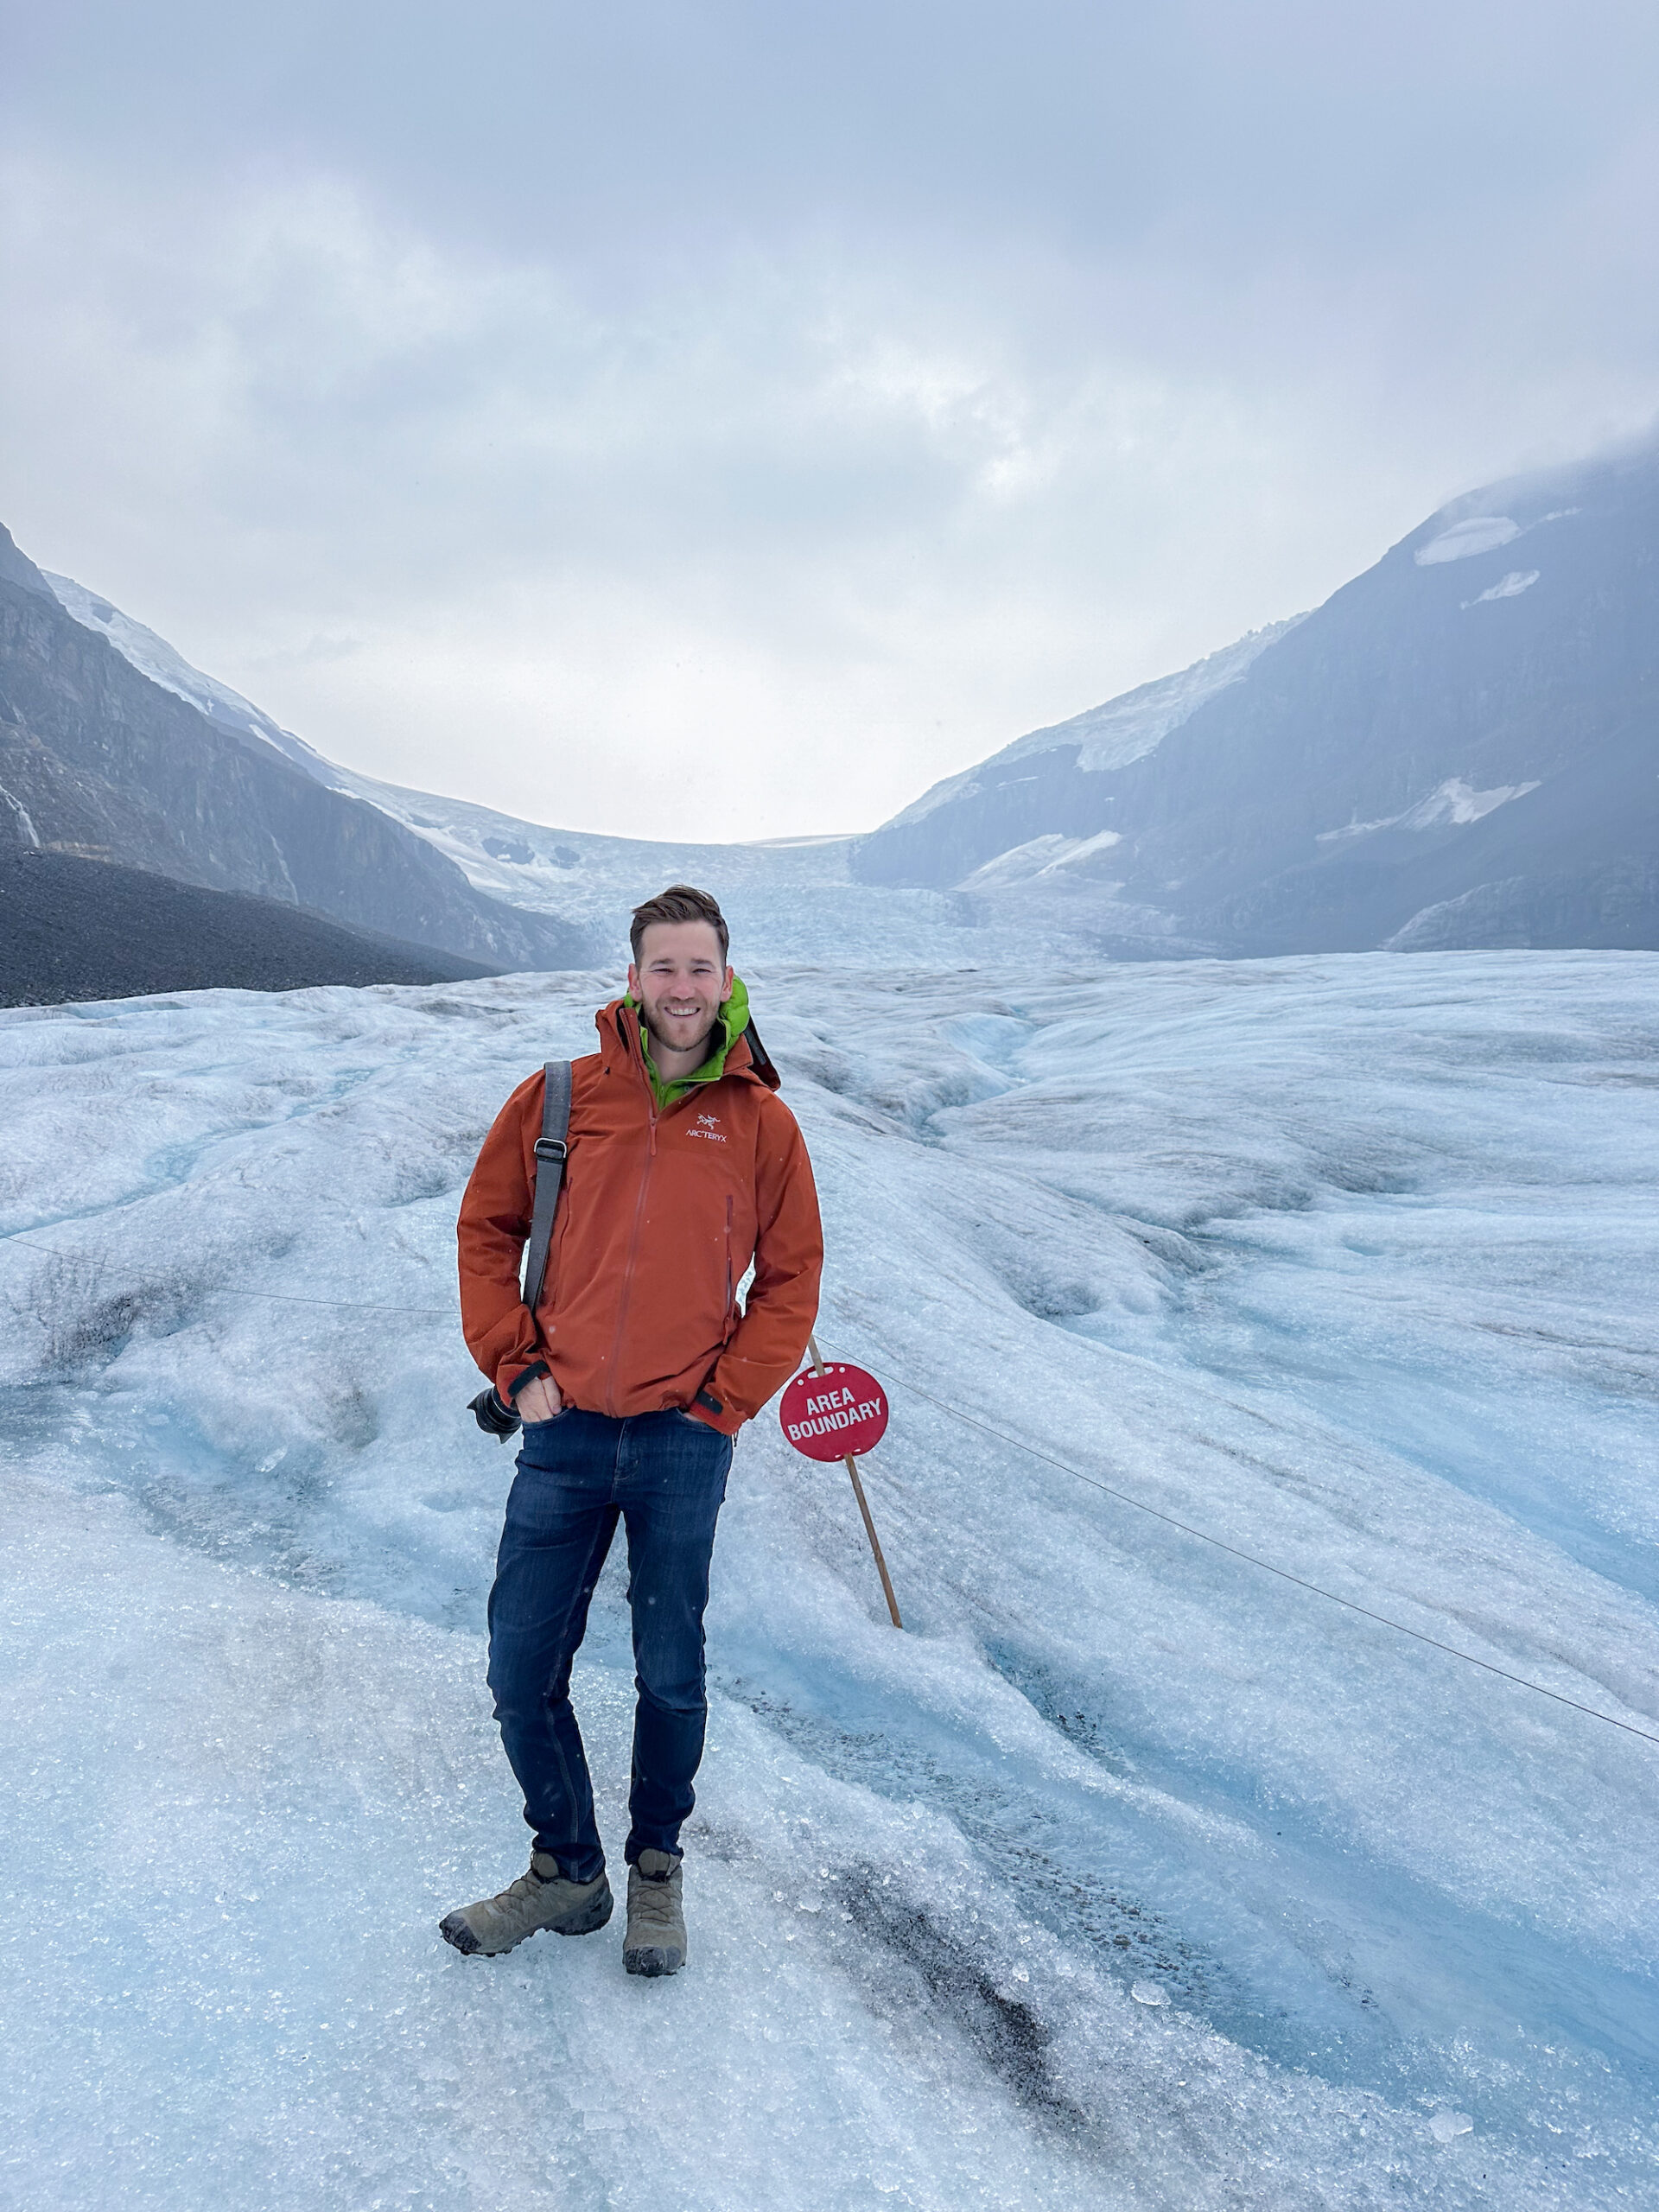 Cameron on the Columbia Icefield Adventure Tour